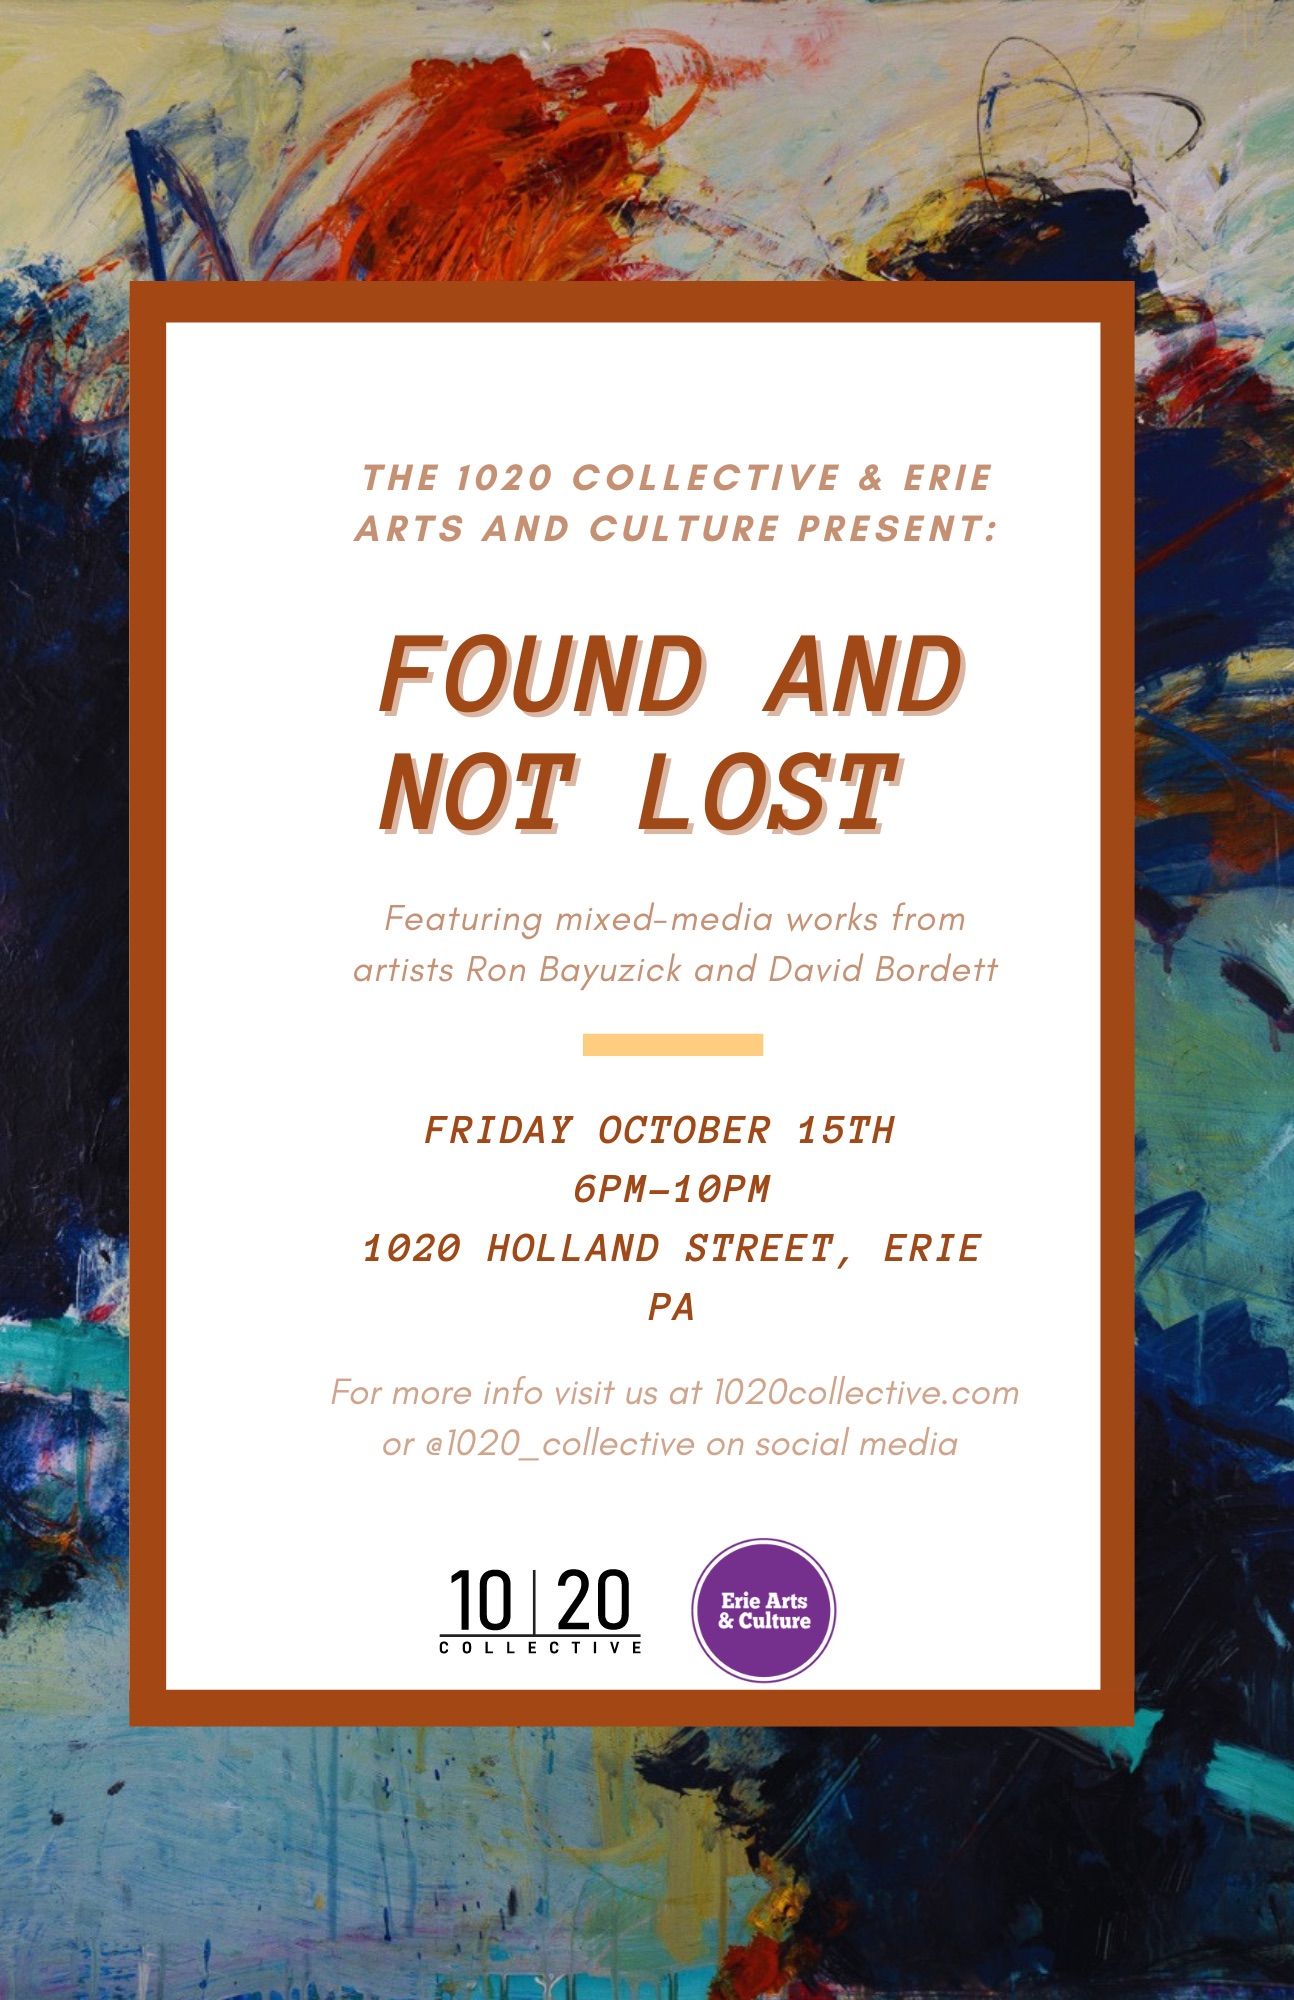 Found and Not Lost - The 1020 Collective